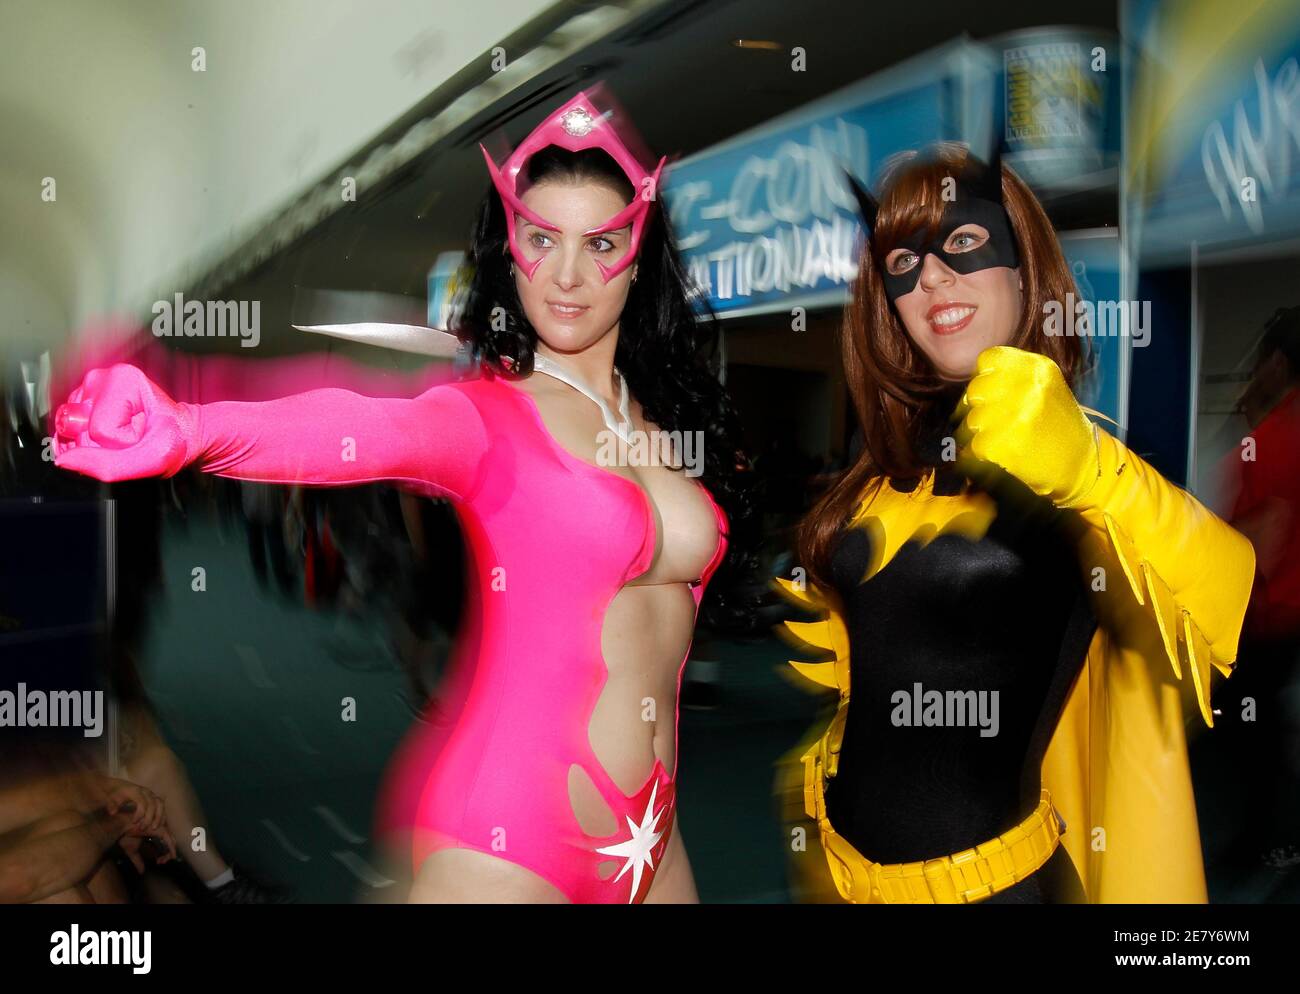 Attendees arrive in costume for the third day of the pop culture convention Comic Con in San Diego, California July 24, 2010.    REUTERS/Mike Blake  (UNITED STATES - Tags: ENTERTAINMENT SOCIETY) Stock Photo